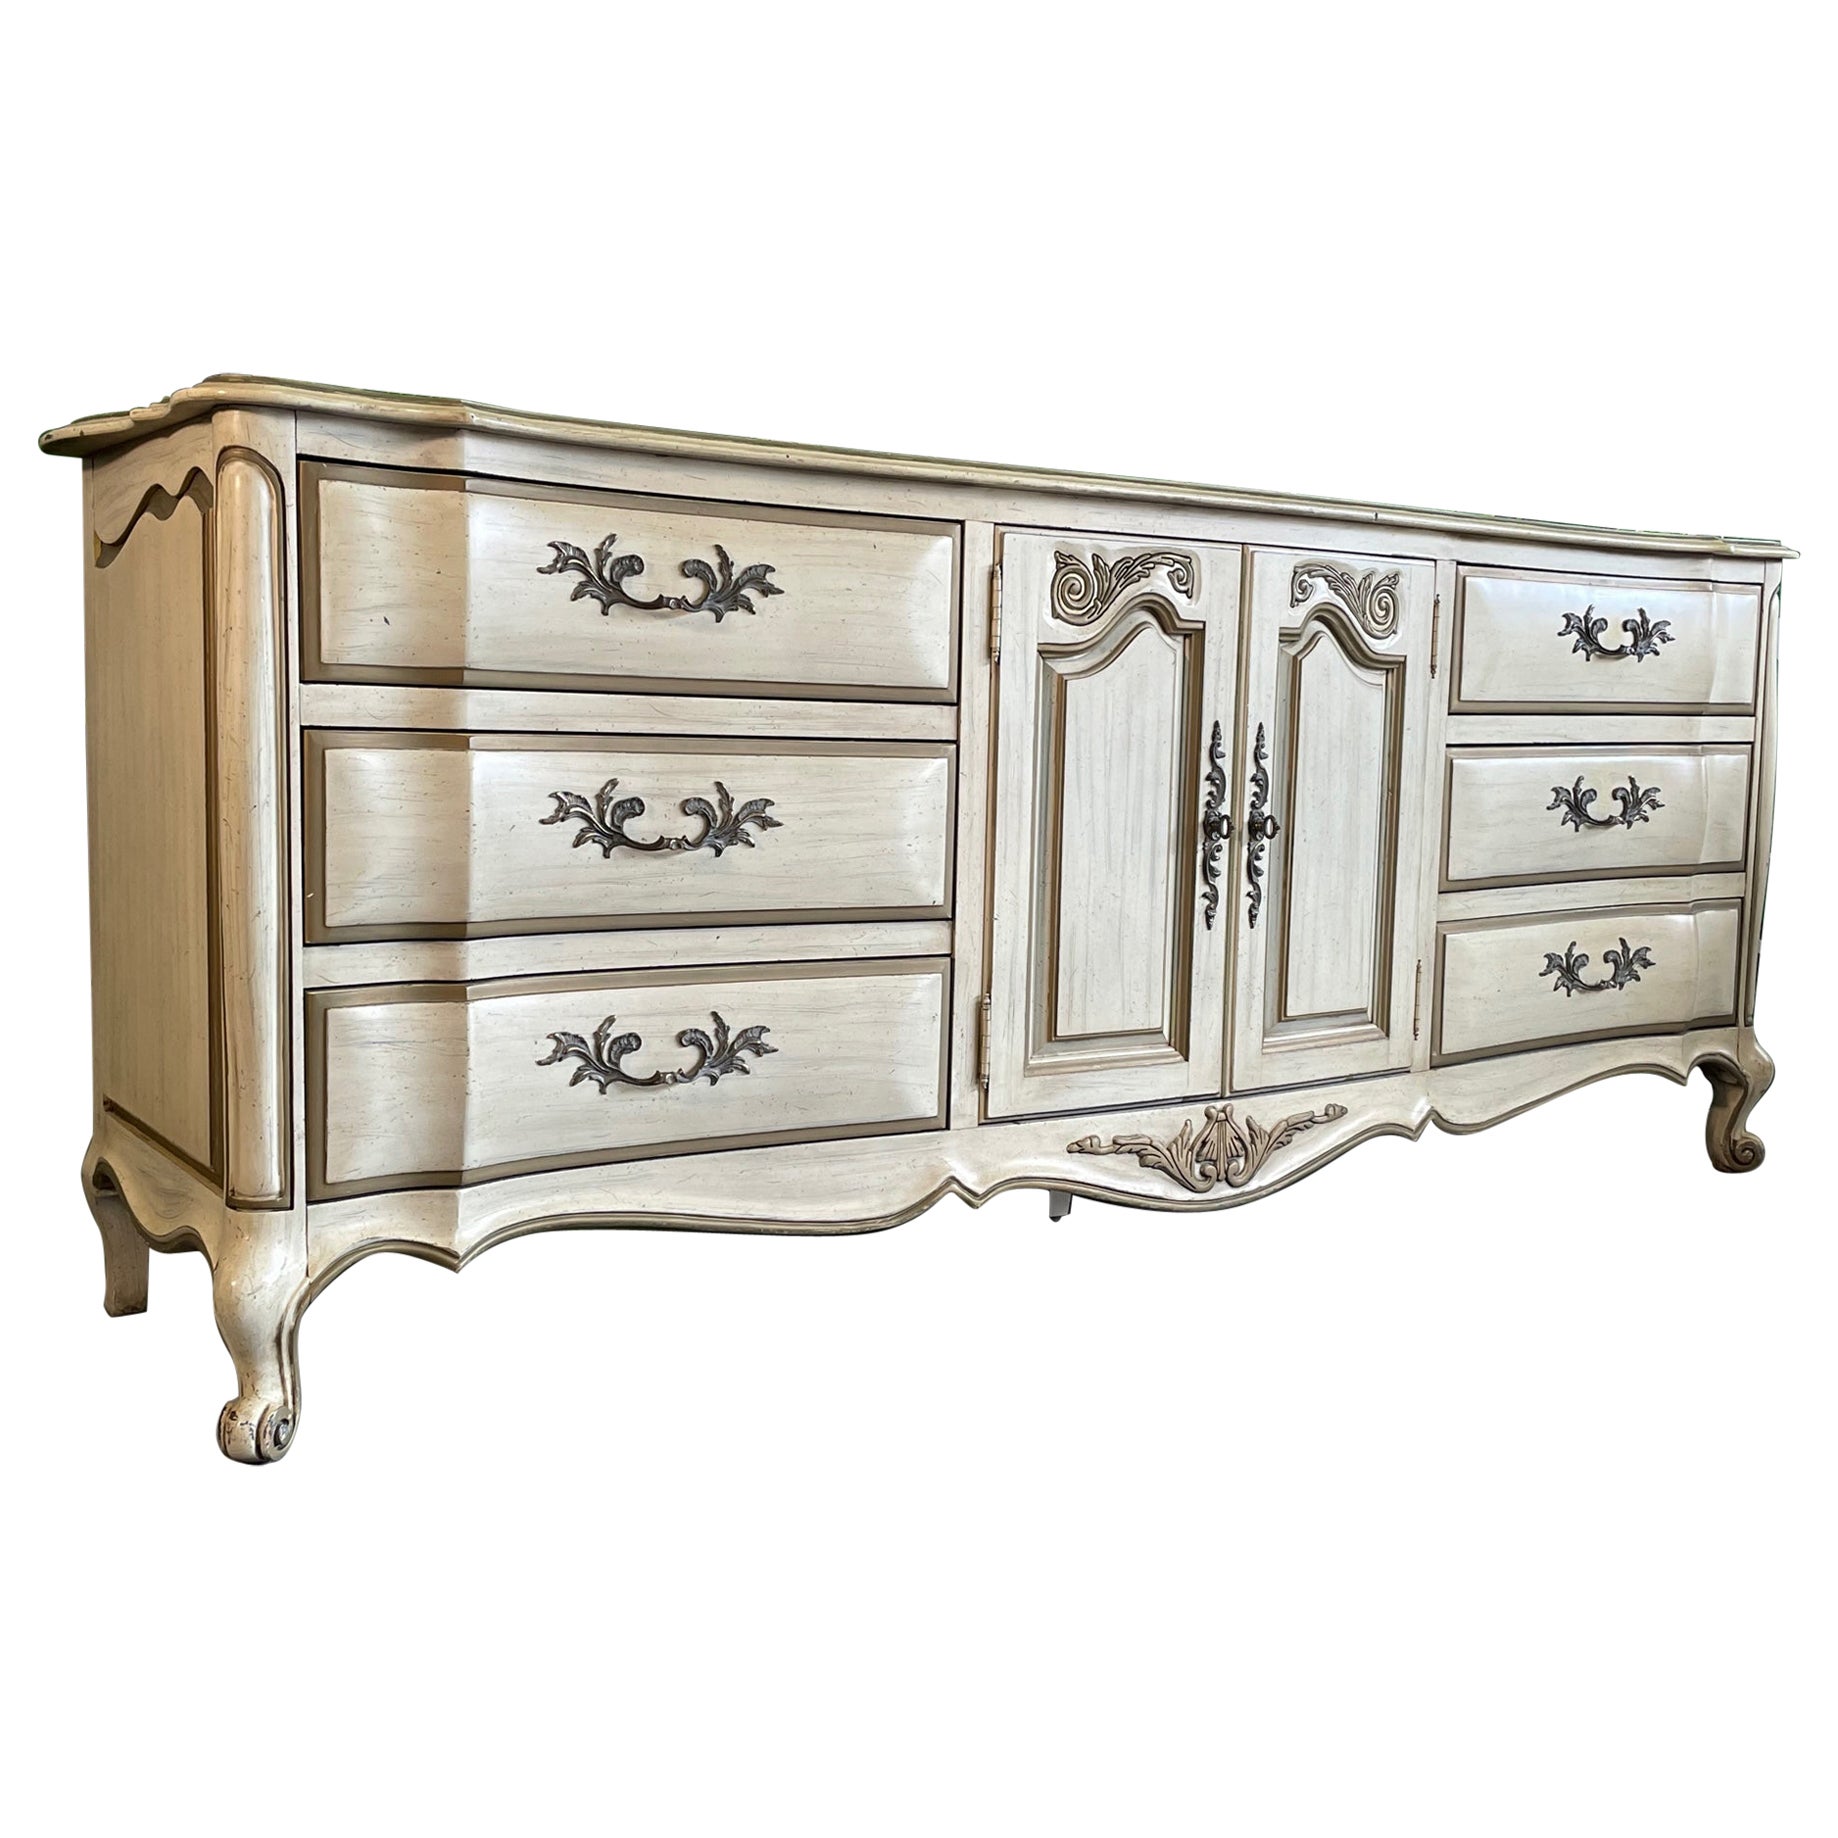 French Provincial Bombe Dresser by White Furniture For Sale